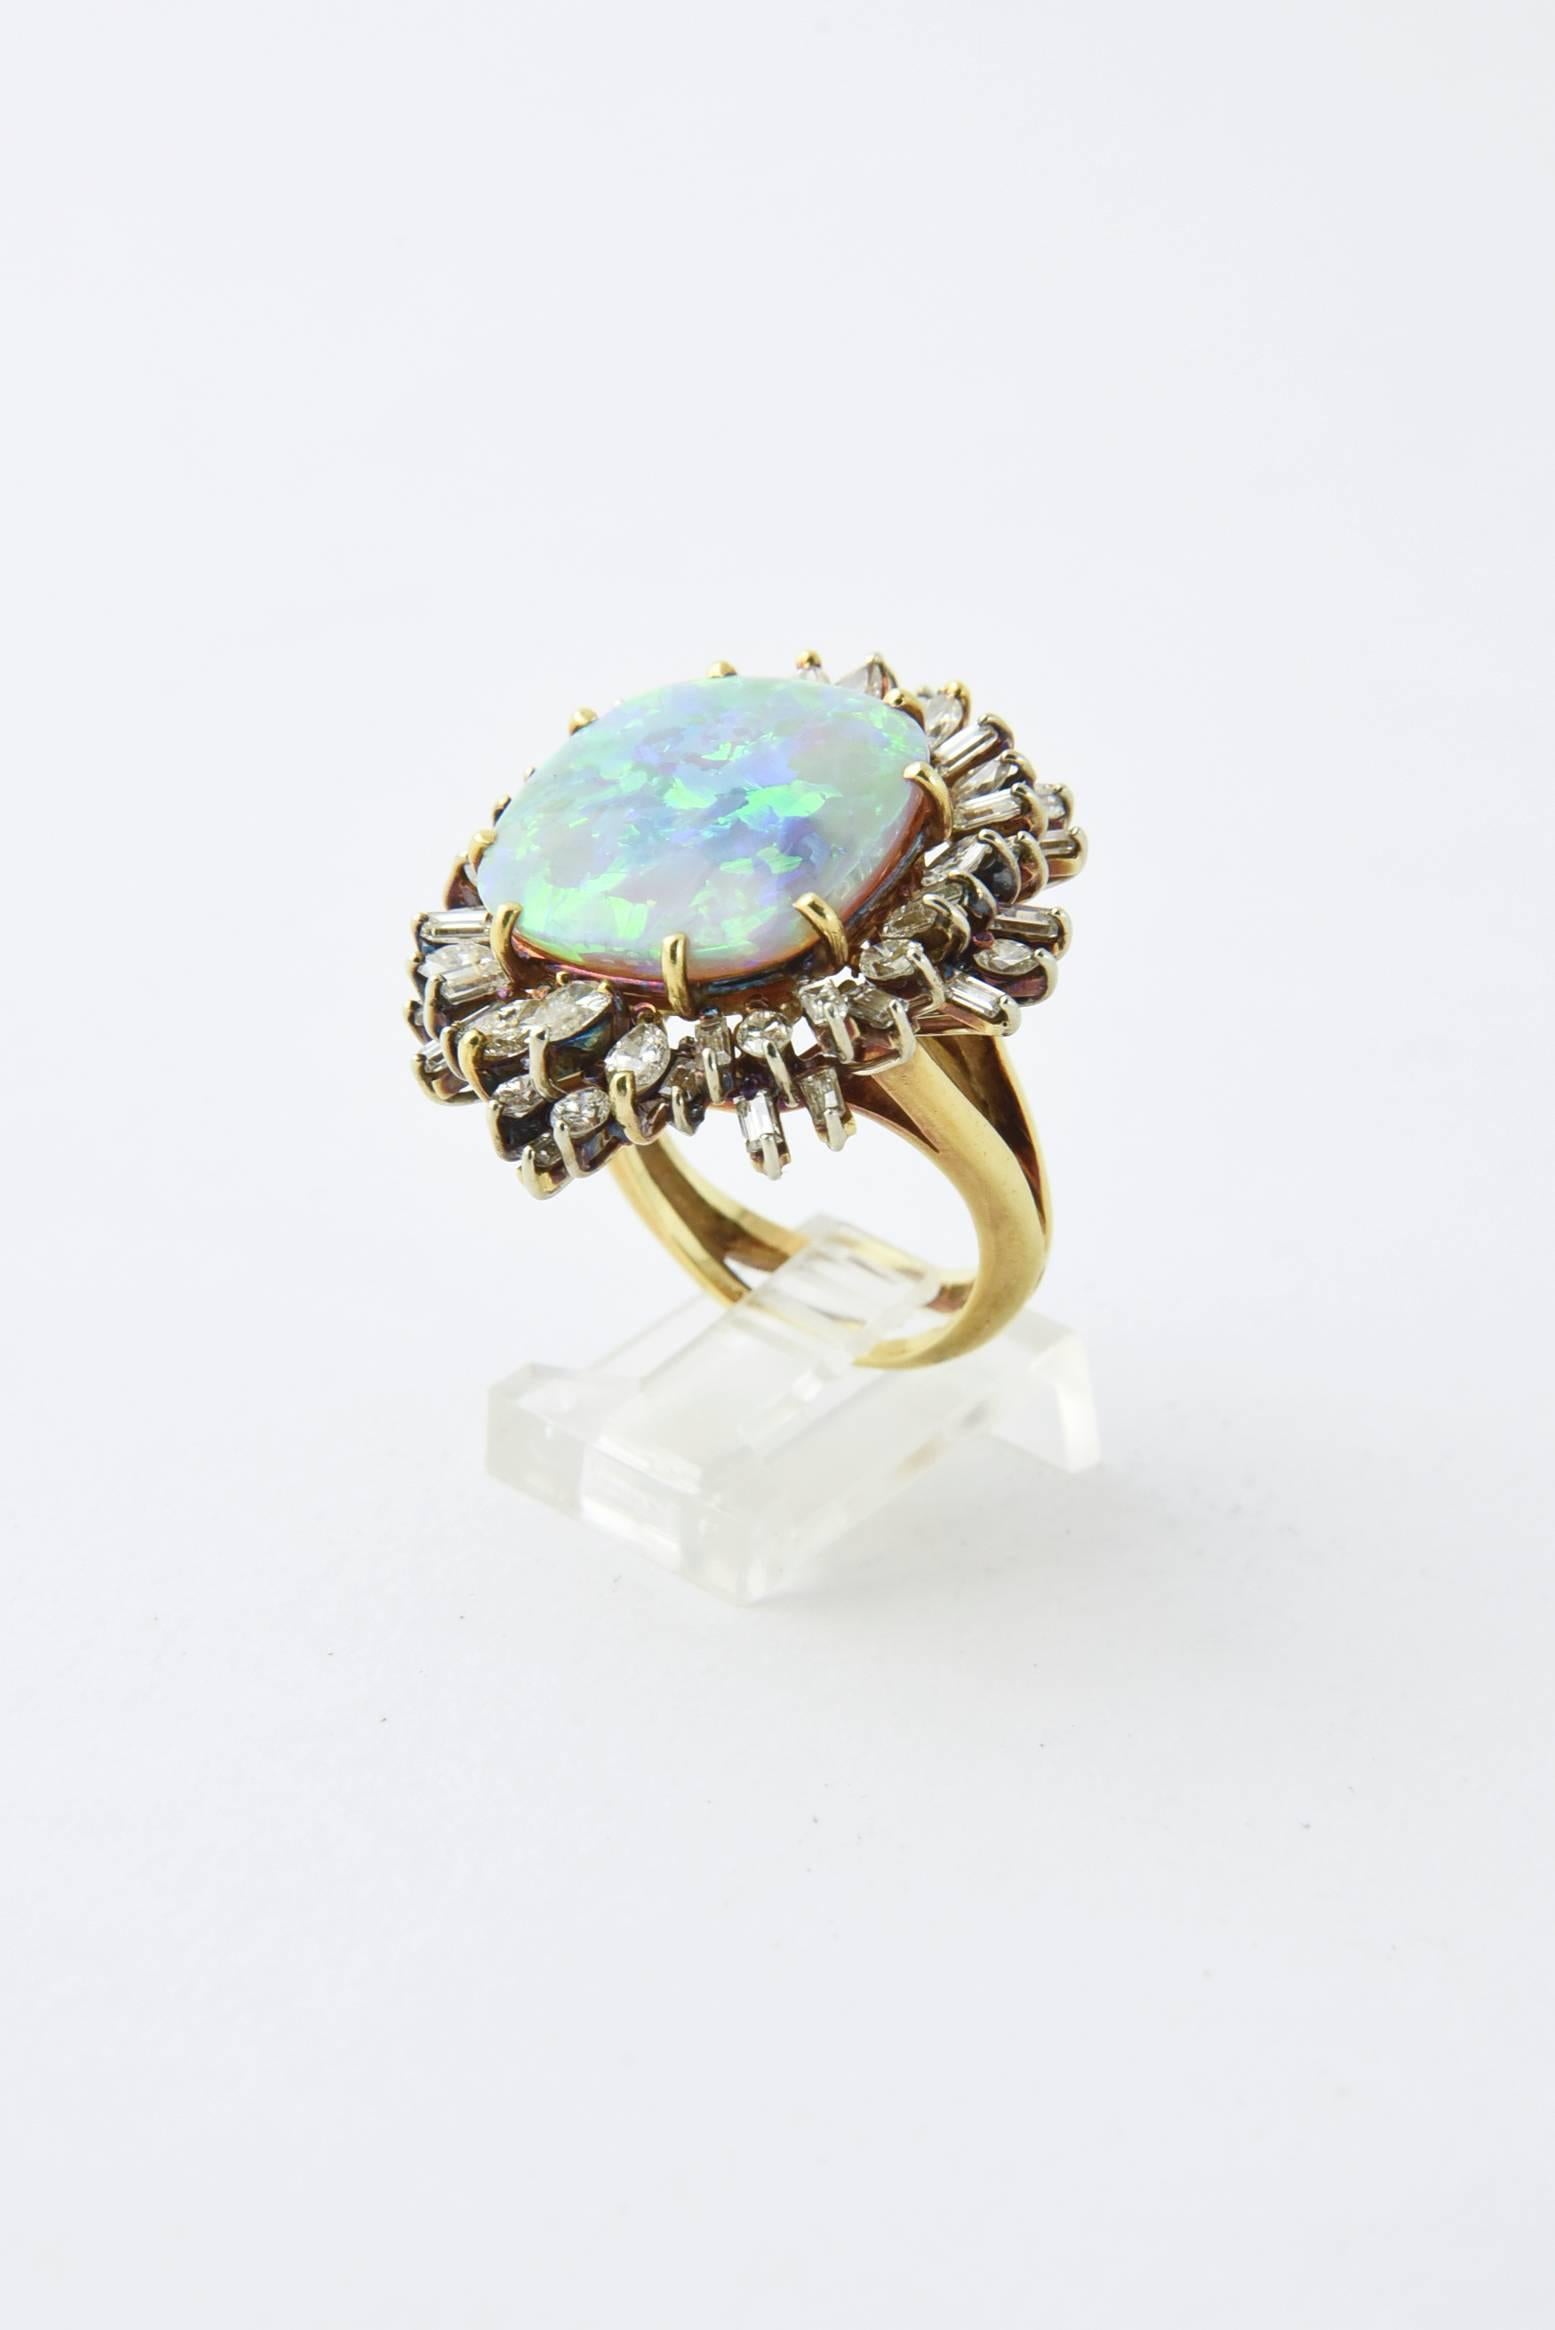 Fine opal ring featuring a 12c approximate weight Australian square shaped gray crystal opal with green, blue and orangish red play of color mounted in an 18k gold mounting full of baguette, marquise and pear shaped diamonds. 

US size 7